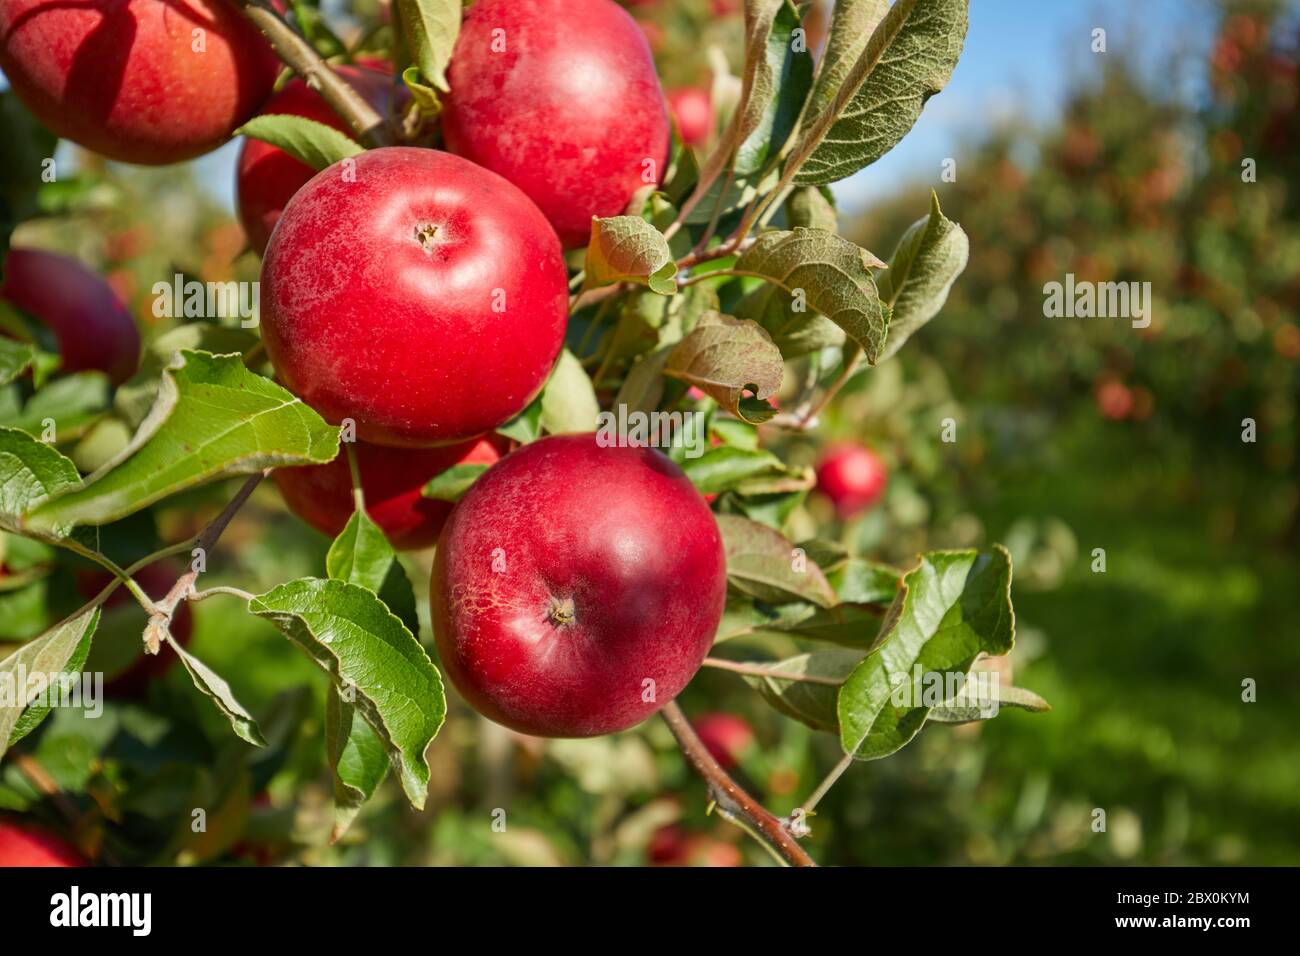 Juicy red apples hanging on the branch in the apple orchrad during autumn. Stock Photo